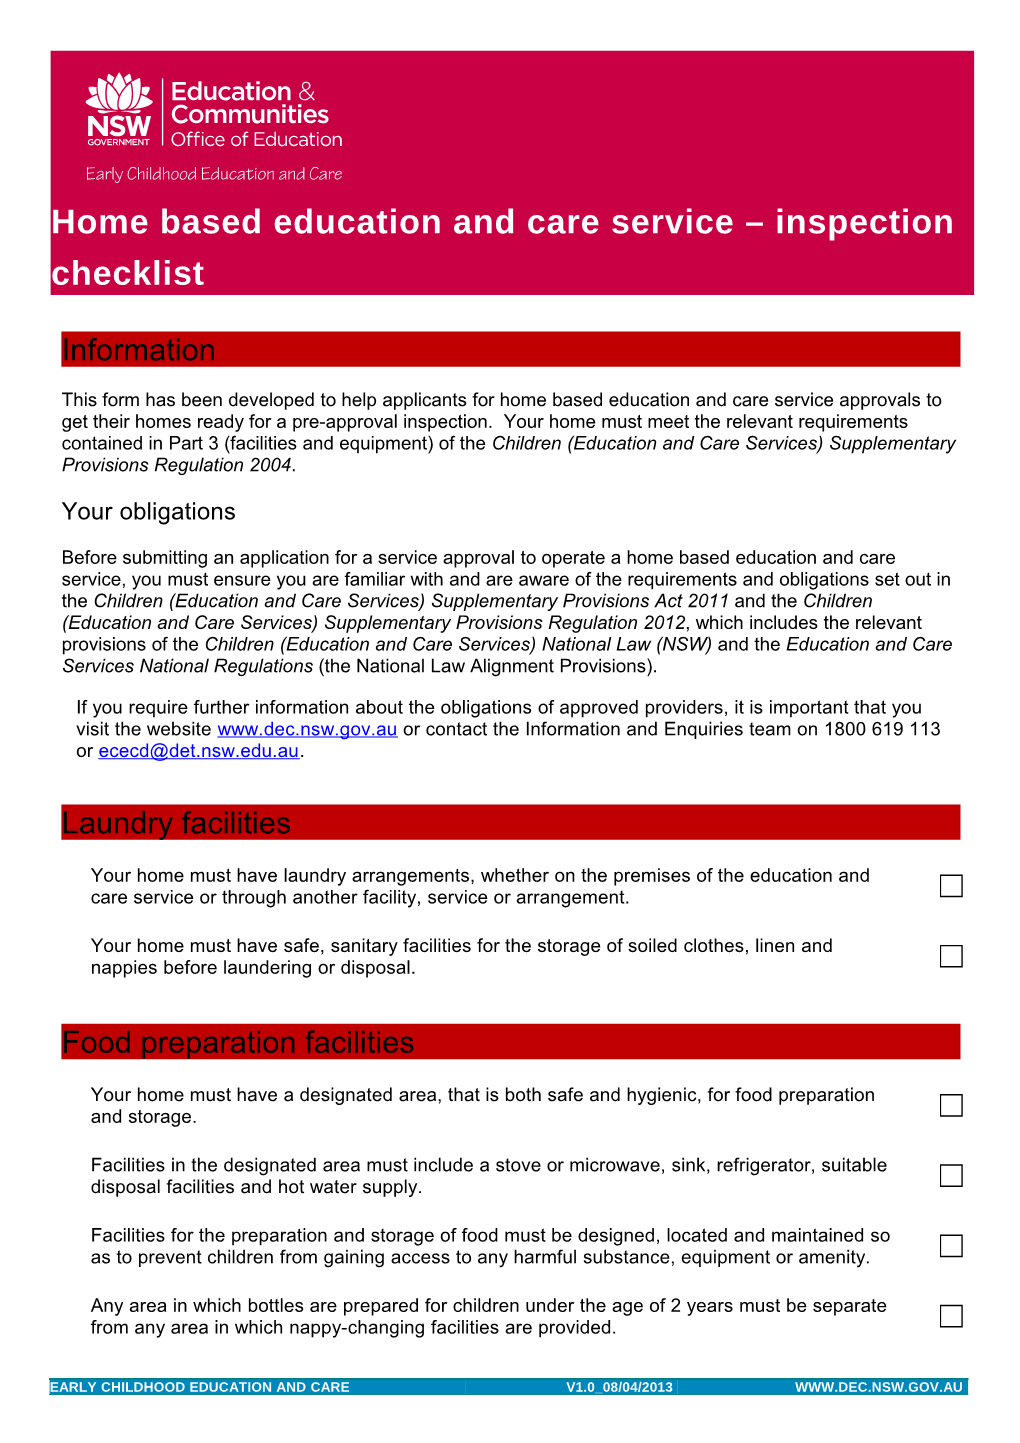 This Form Has Been Developed to Help Applicants for Home Based Education and Care Service